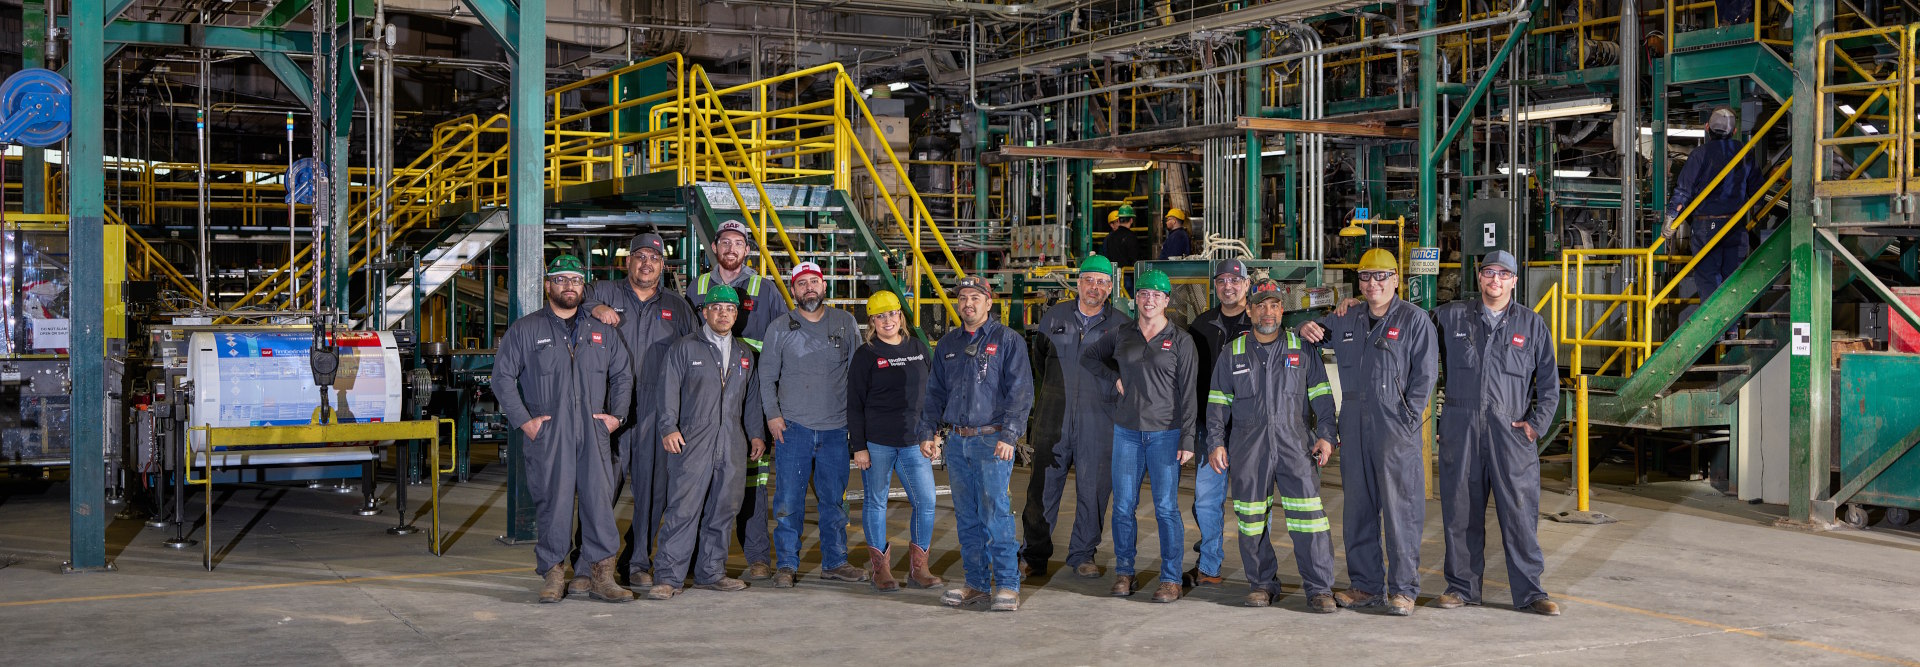 GAF employees at roofing manufacturing plant